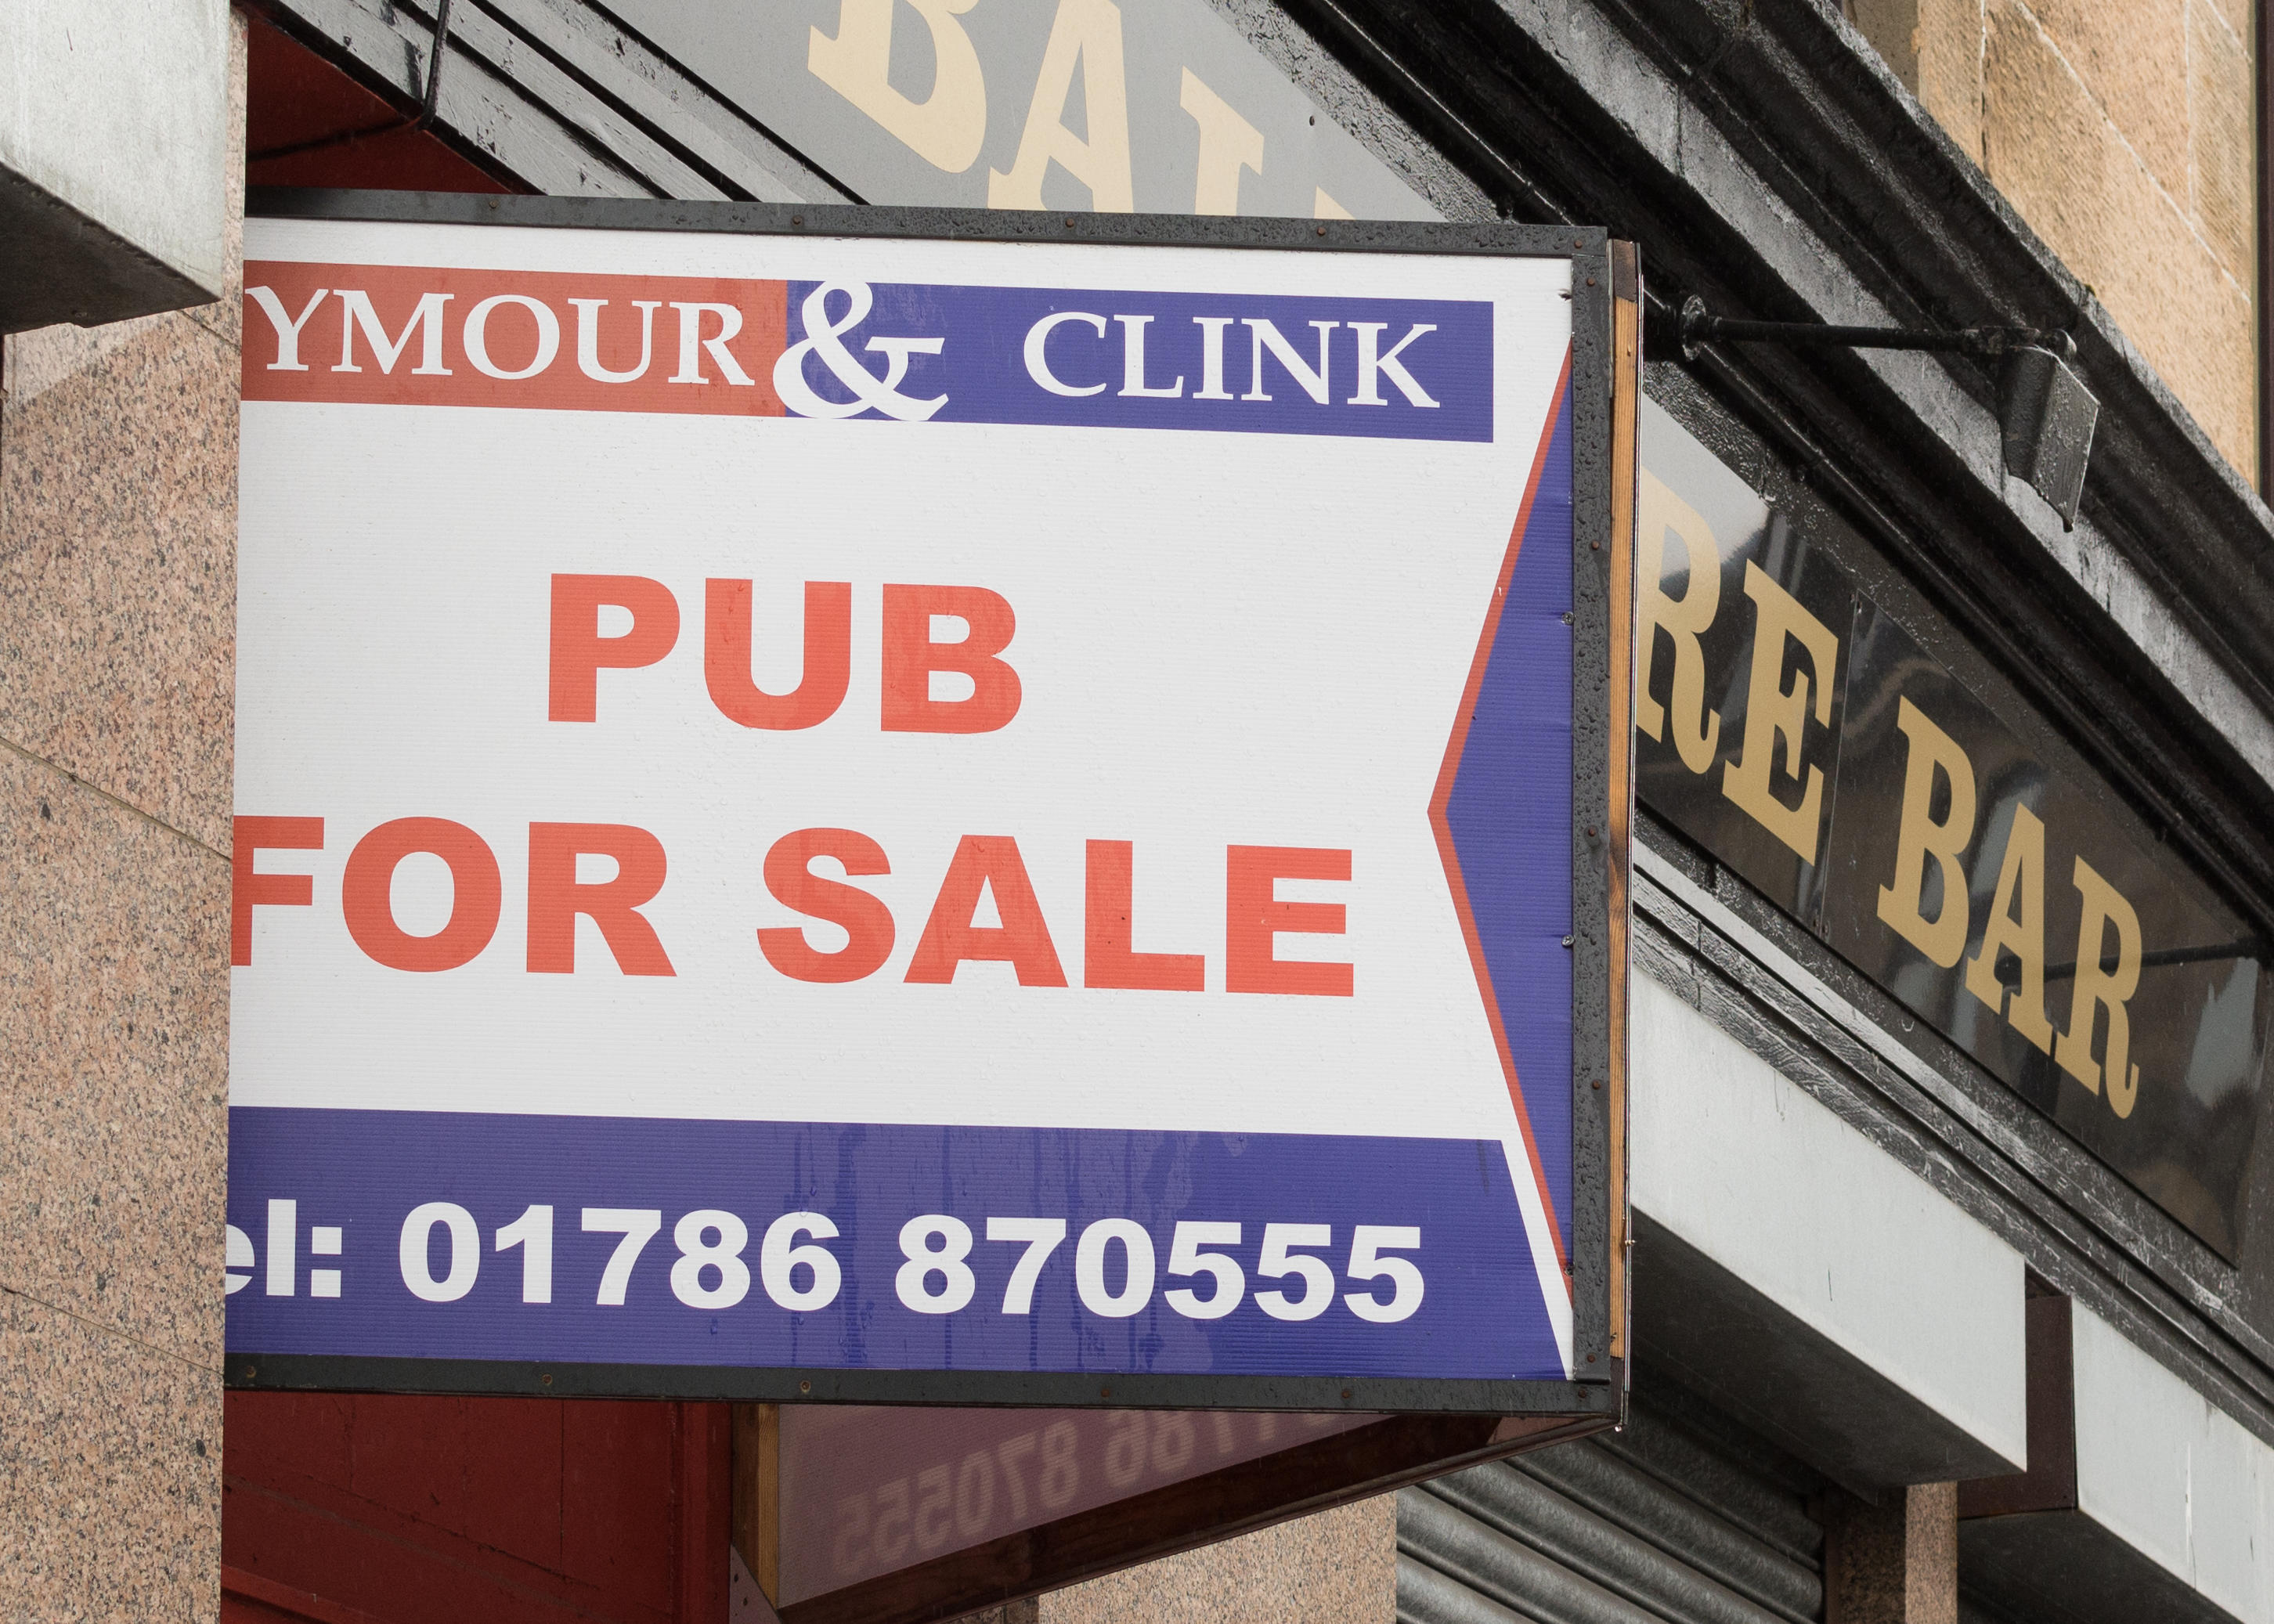 A rise in the rate of pub closures could spark a crime blitz and mental health crisis, experts have warned